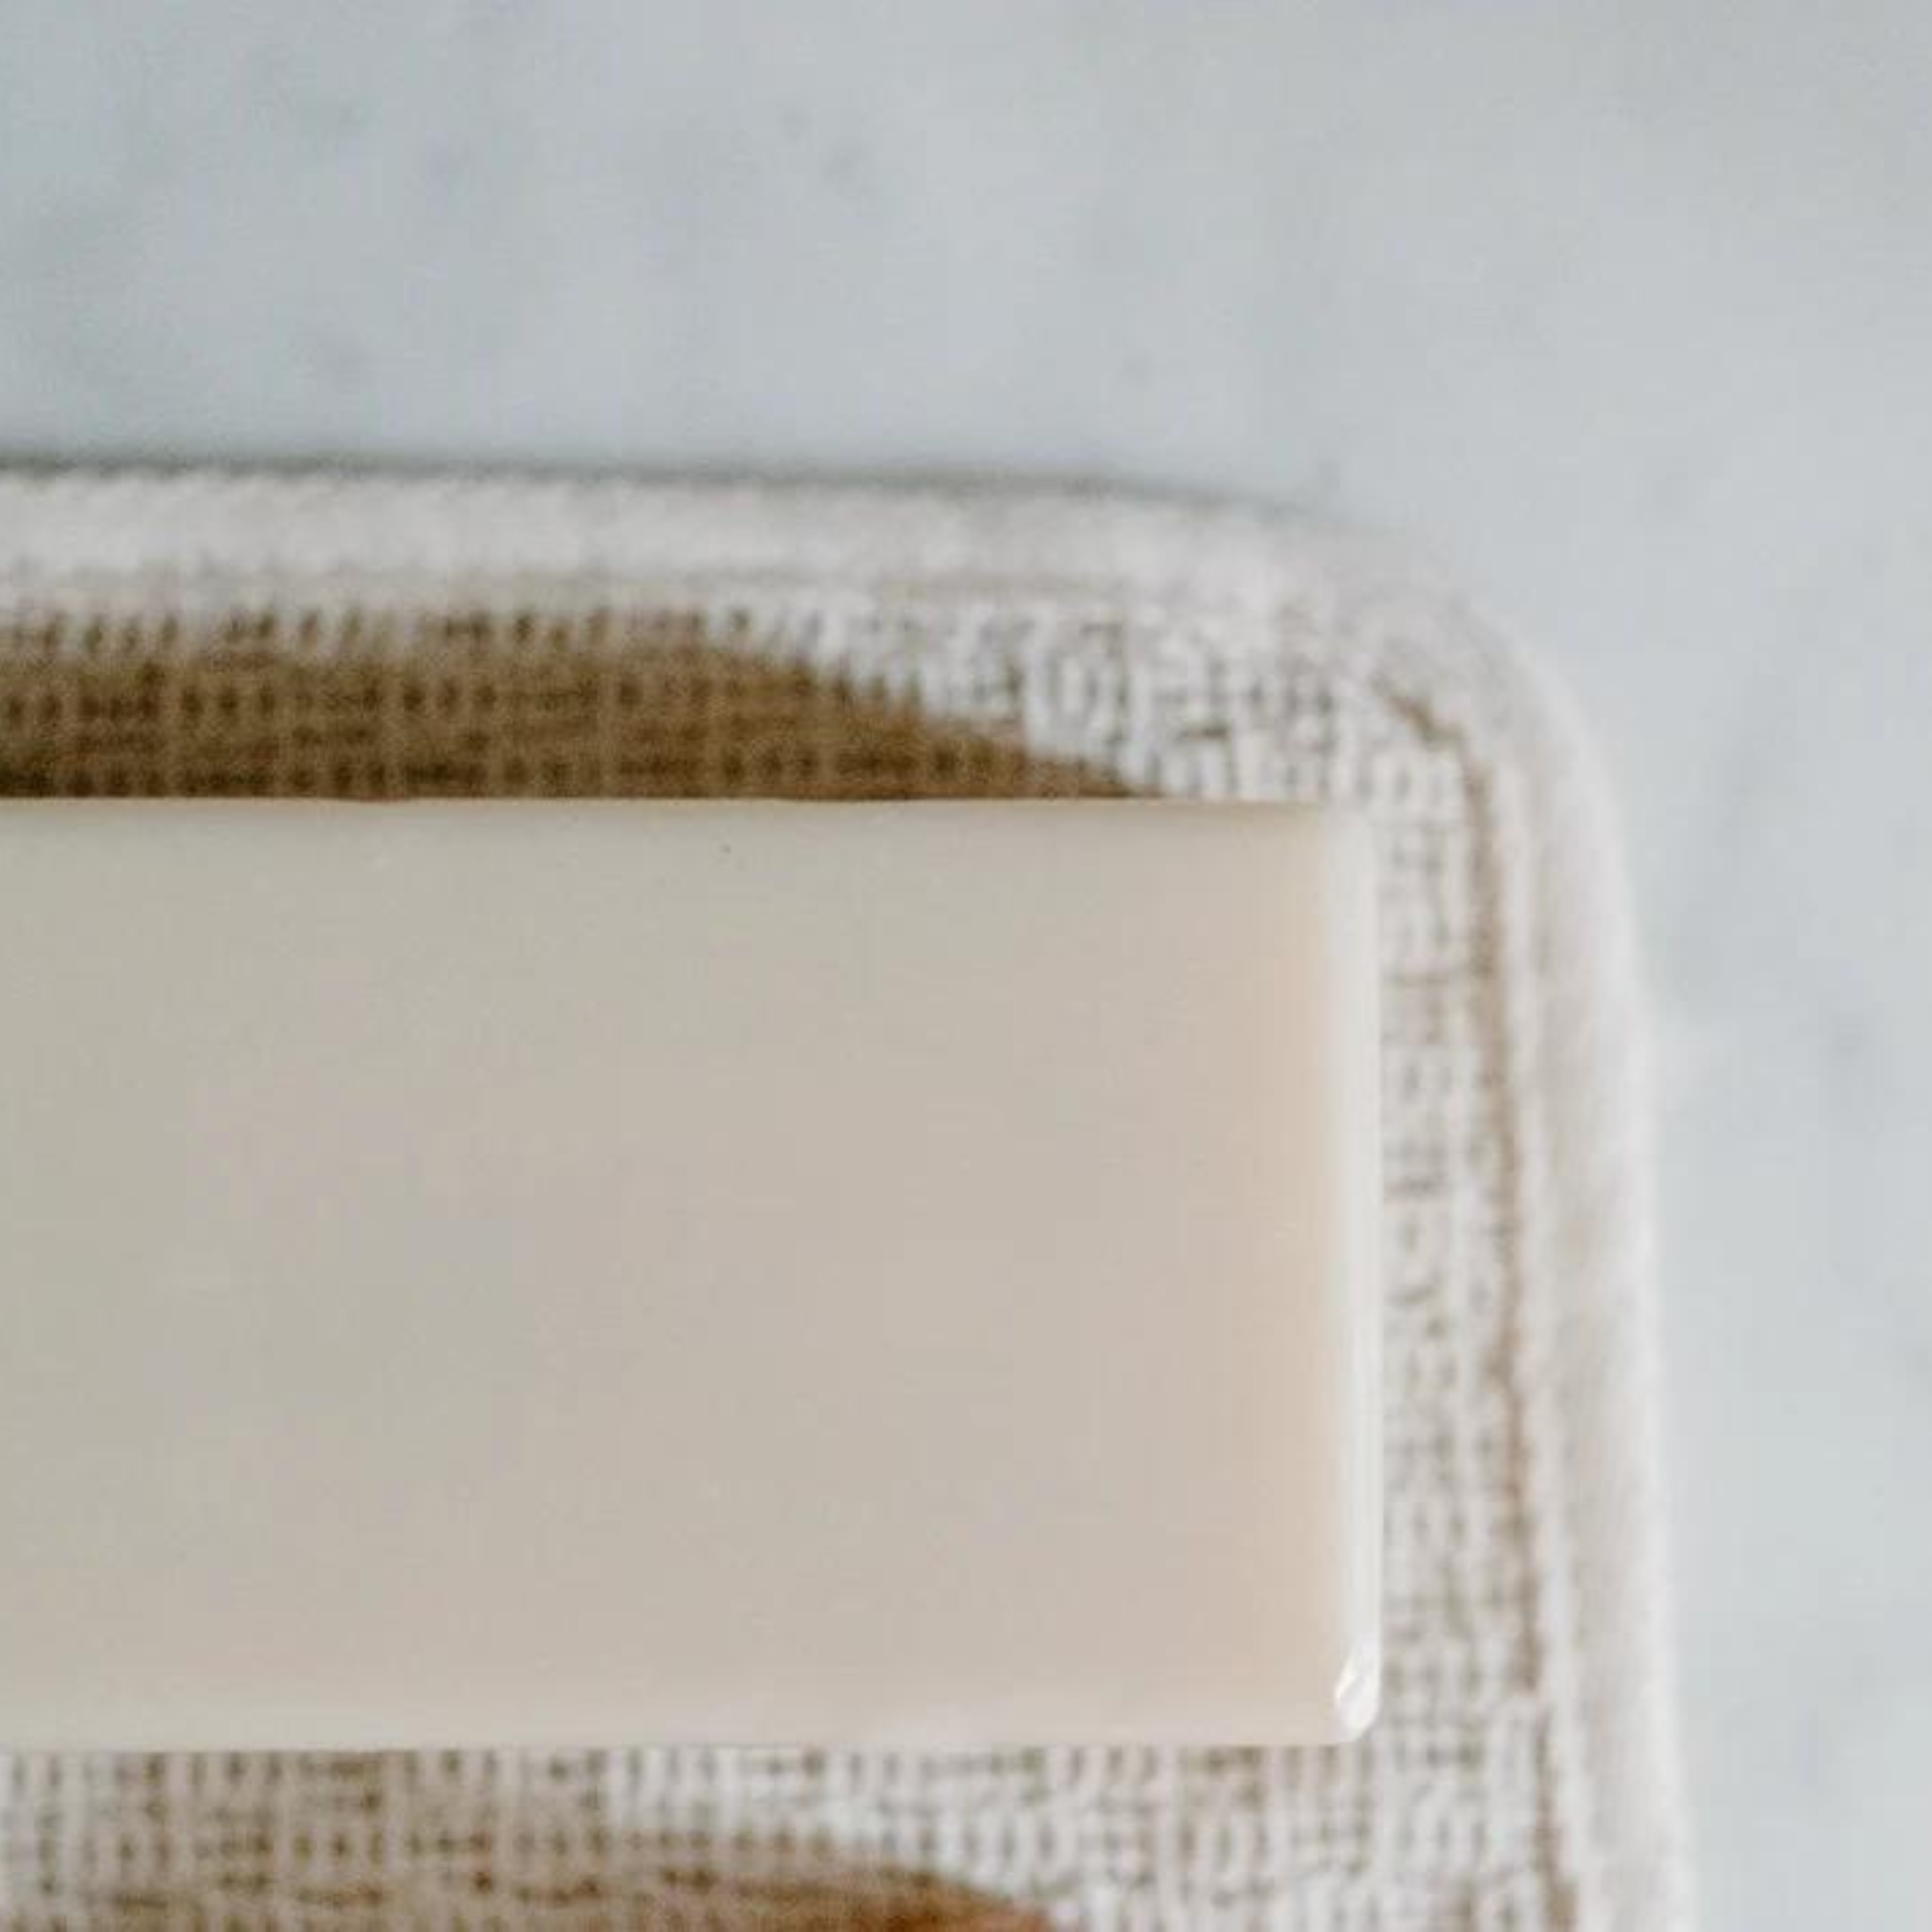 The G.O.A.T: tallow and goat milk soap